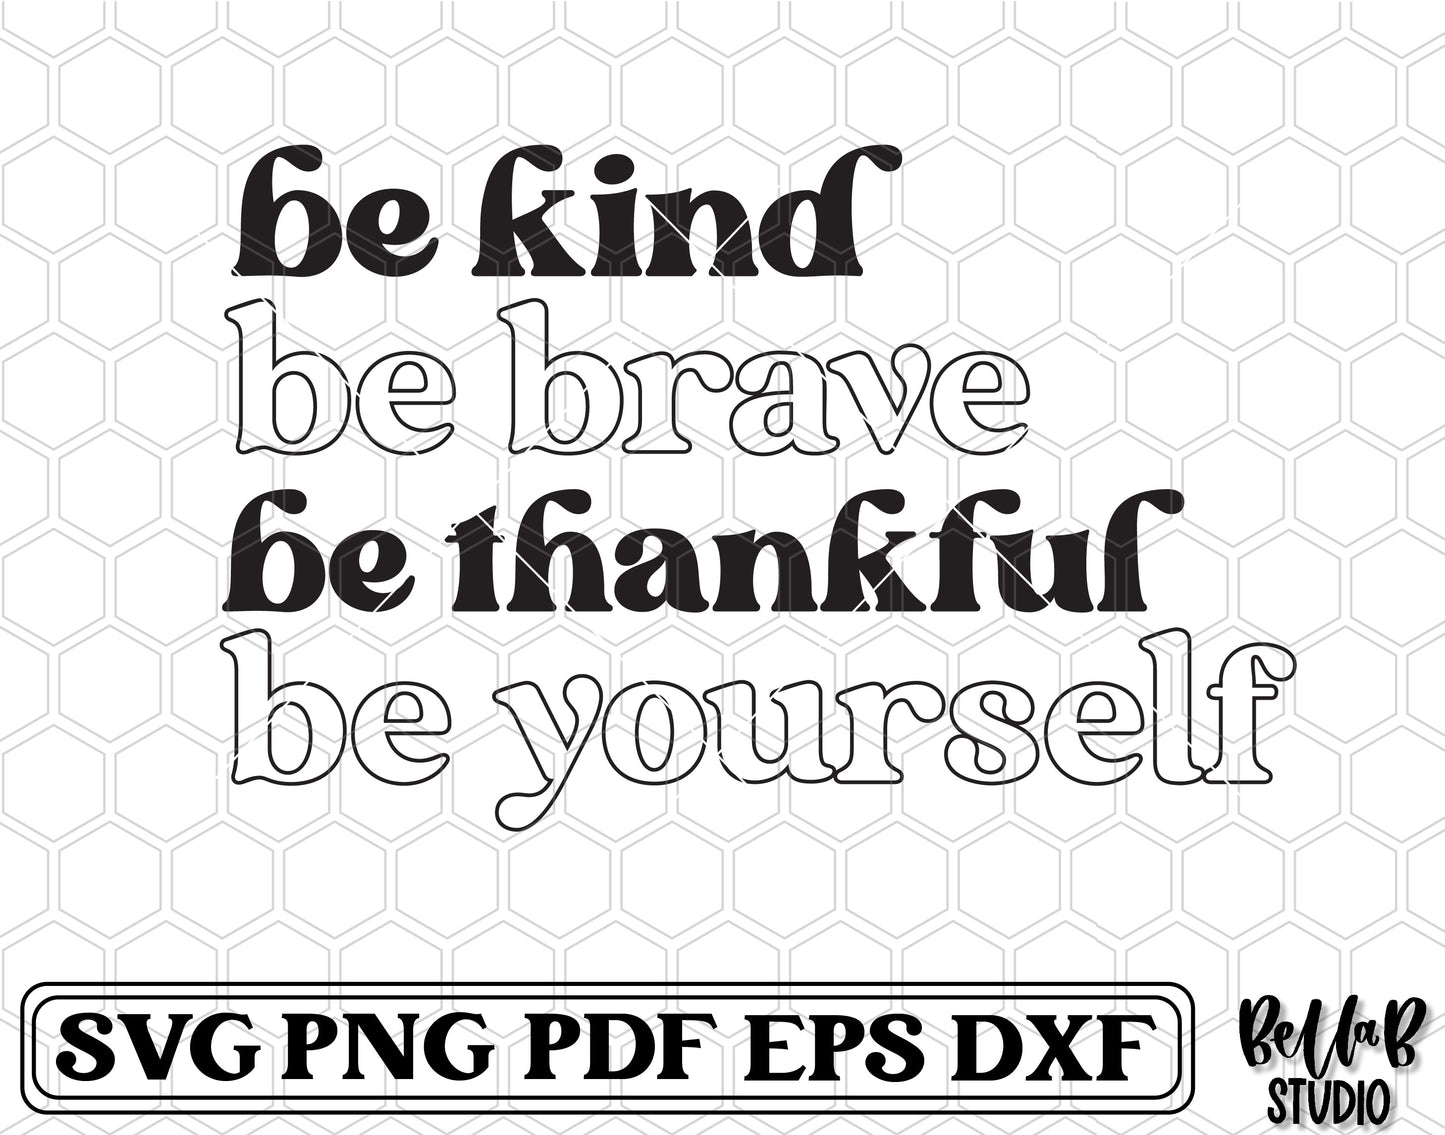 Be Kind Be Brave Be Thankful Be Yourself SVG File